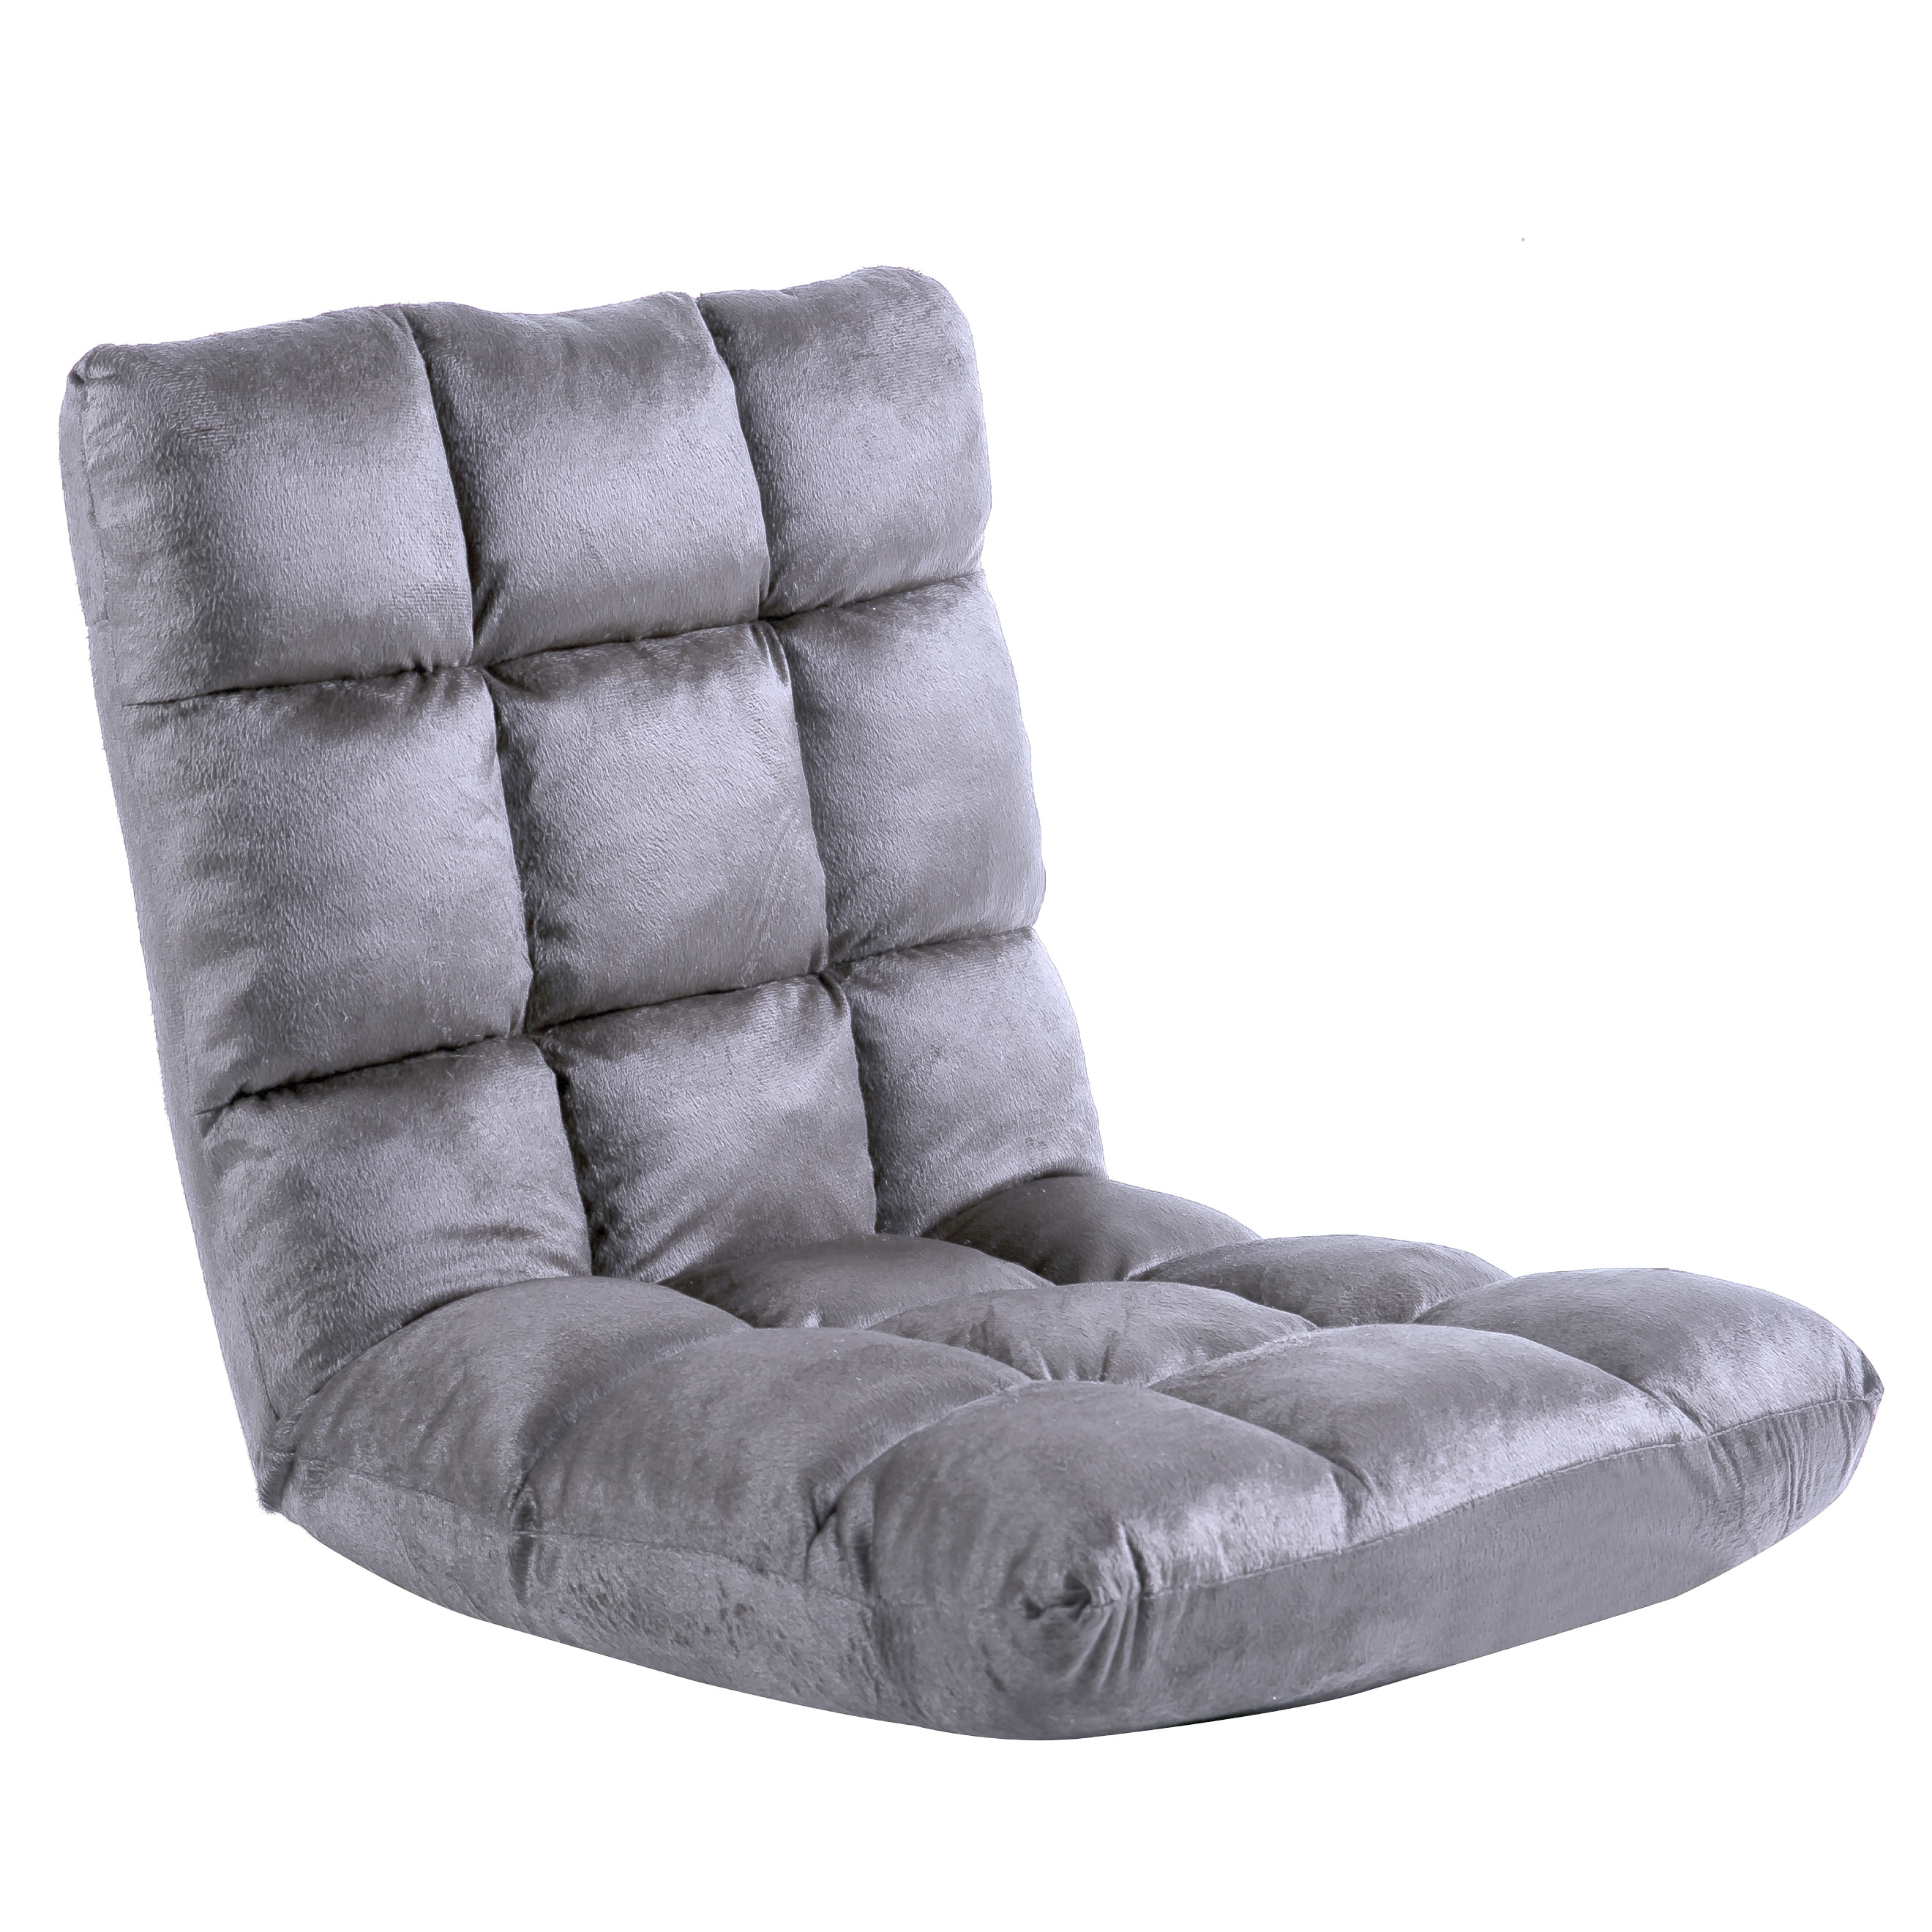 https://ak1.ostkcdn.com/images/products/is/images/direct/e06c6940fb8a292fea49c29a0d478fffac1067ce/Indoor-5-Position-Adjustable-Floor-Sofa-Chair%2C-with-Back-Support-Folding-Sofa-Chair%2C-Lounge-Sofa-Chair%2CPerfect-for-Reading.jpg